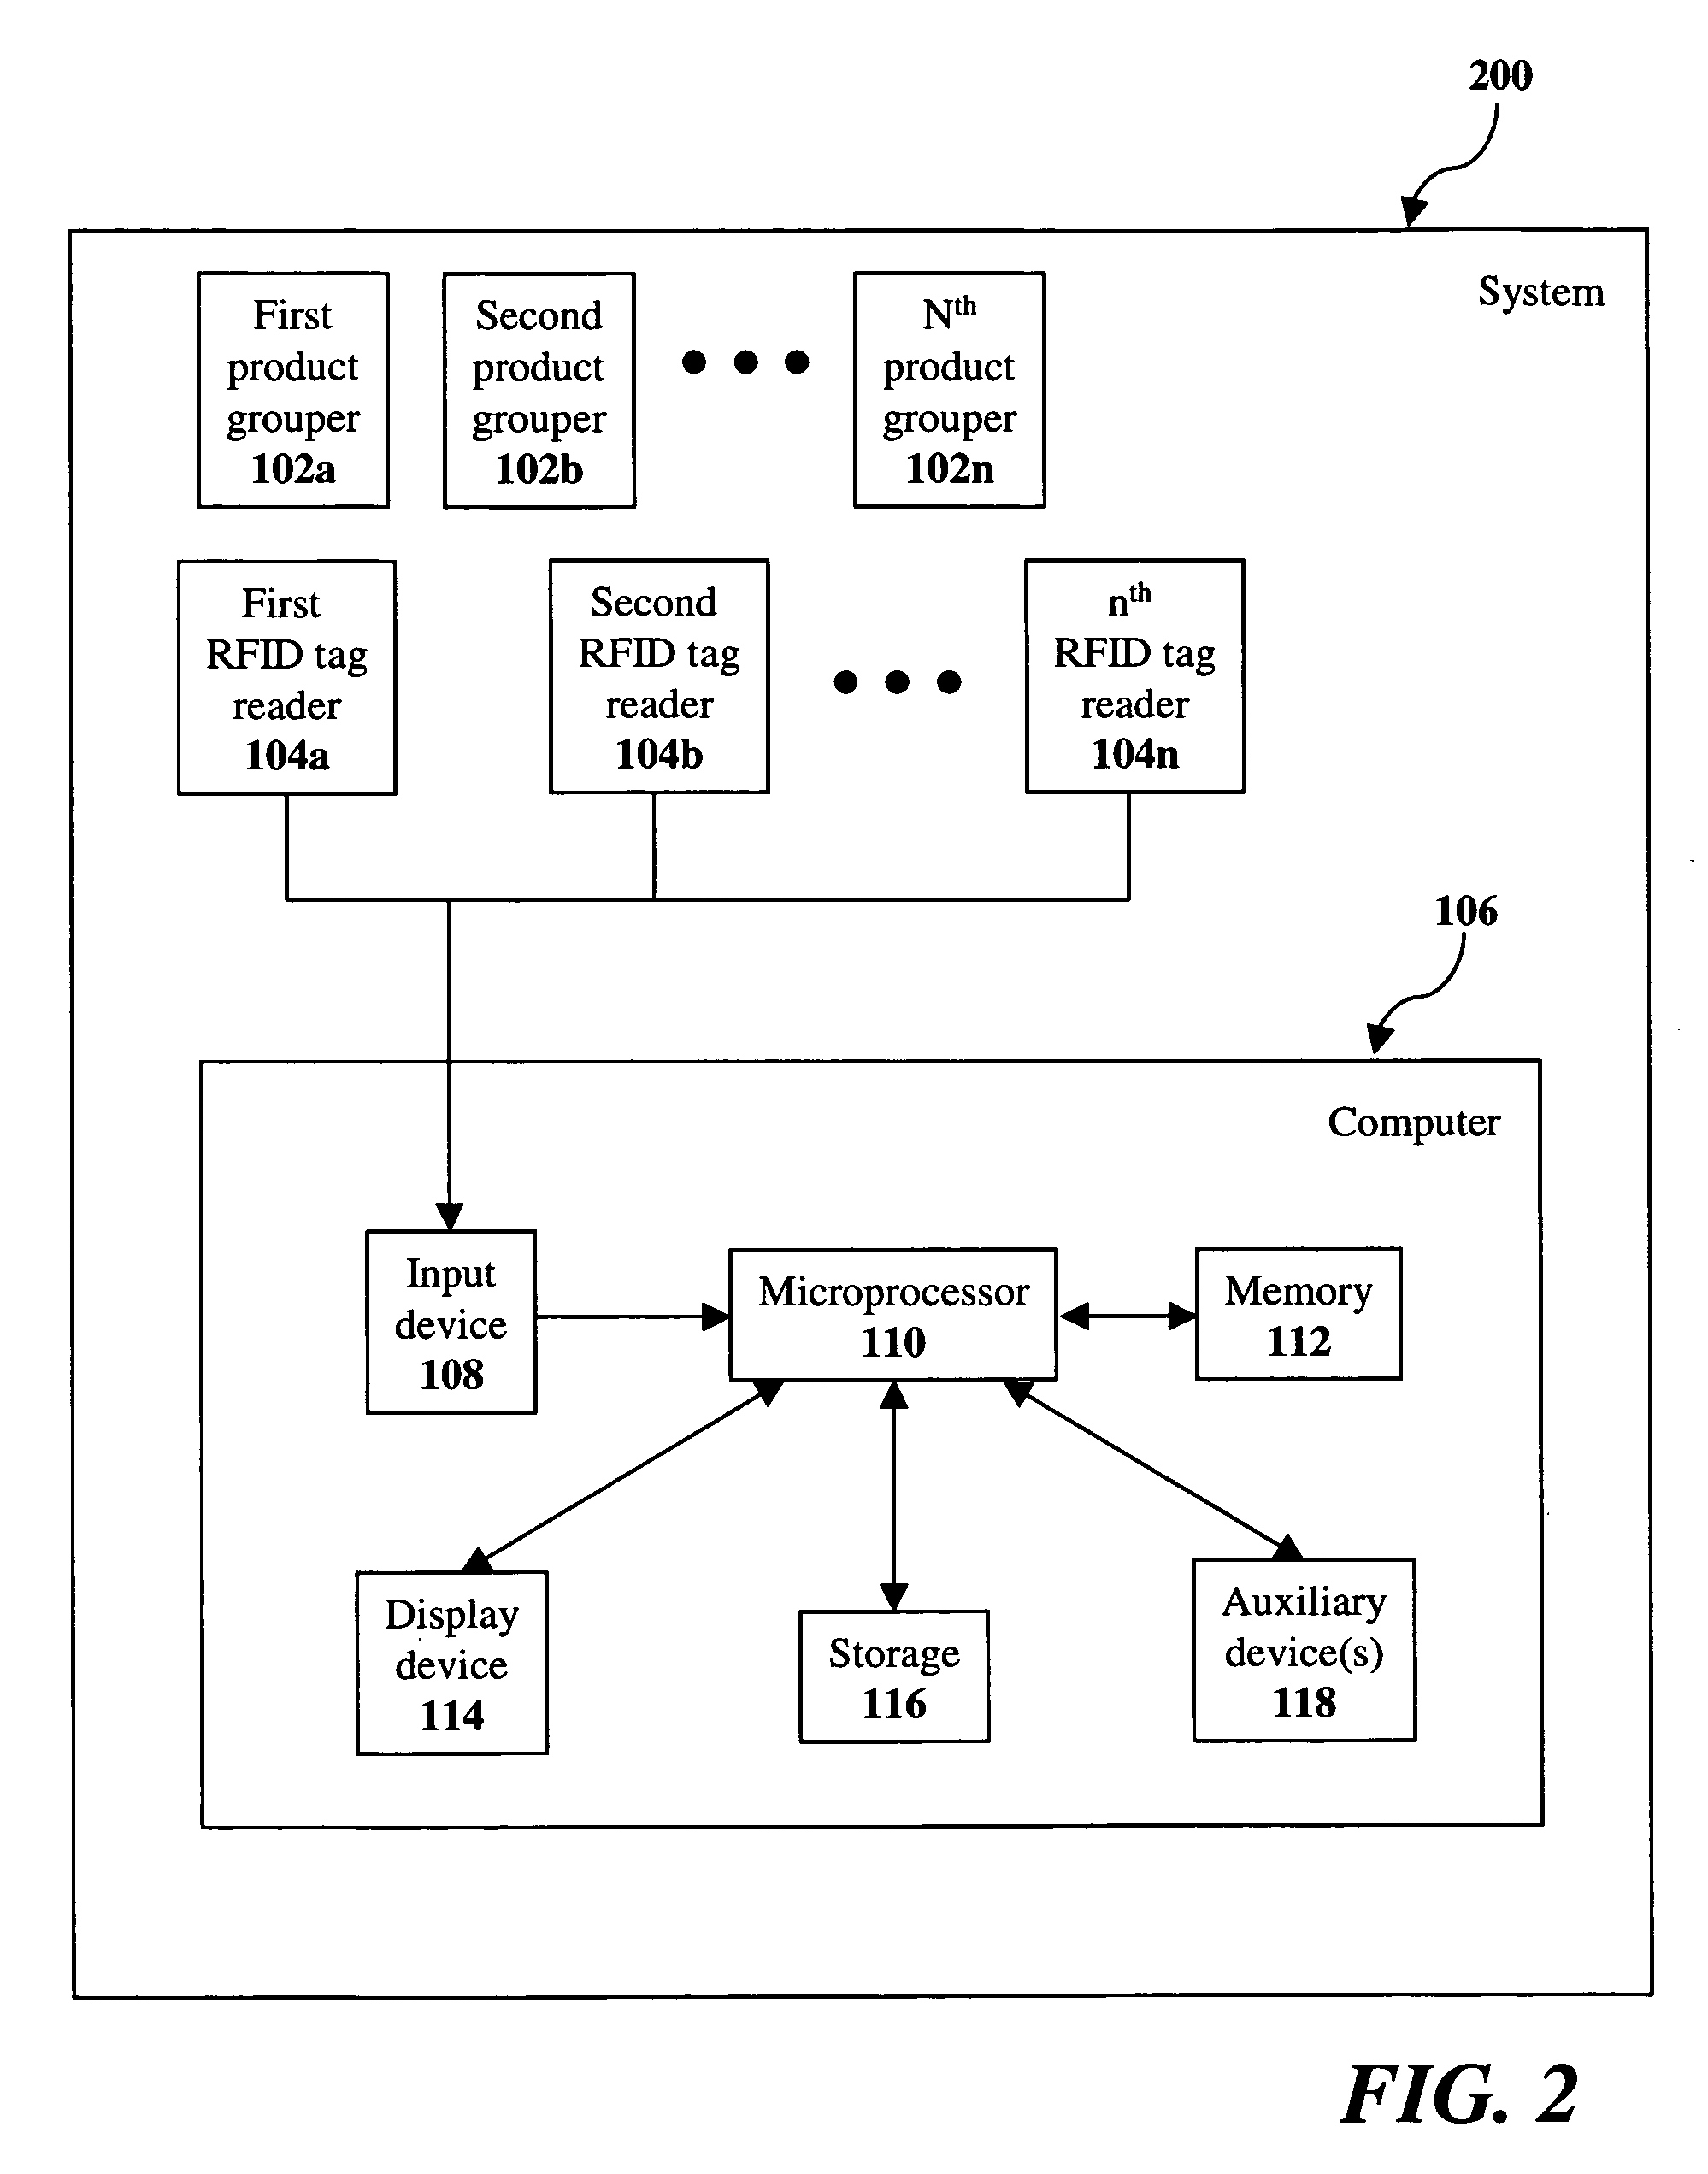 Systems and methods for managing inventory of aggregated post-consumer goods